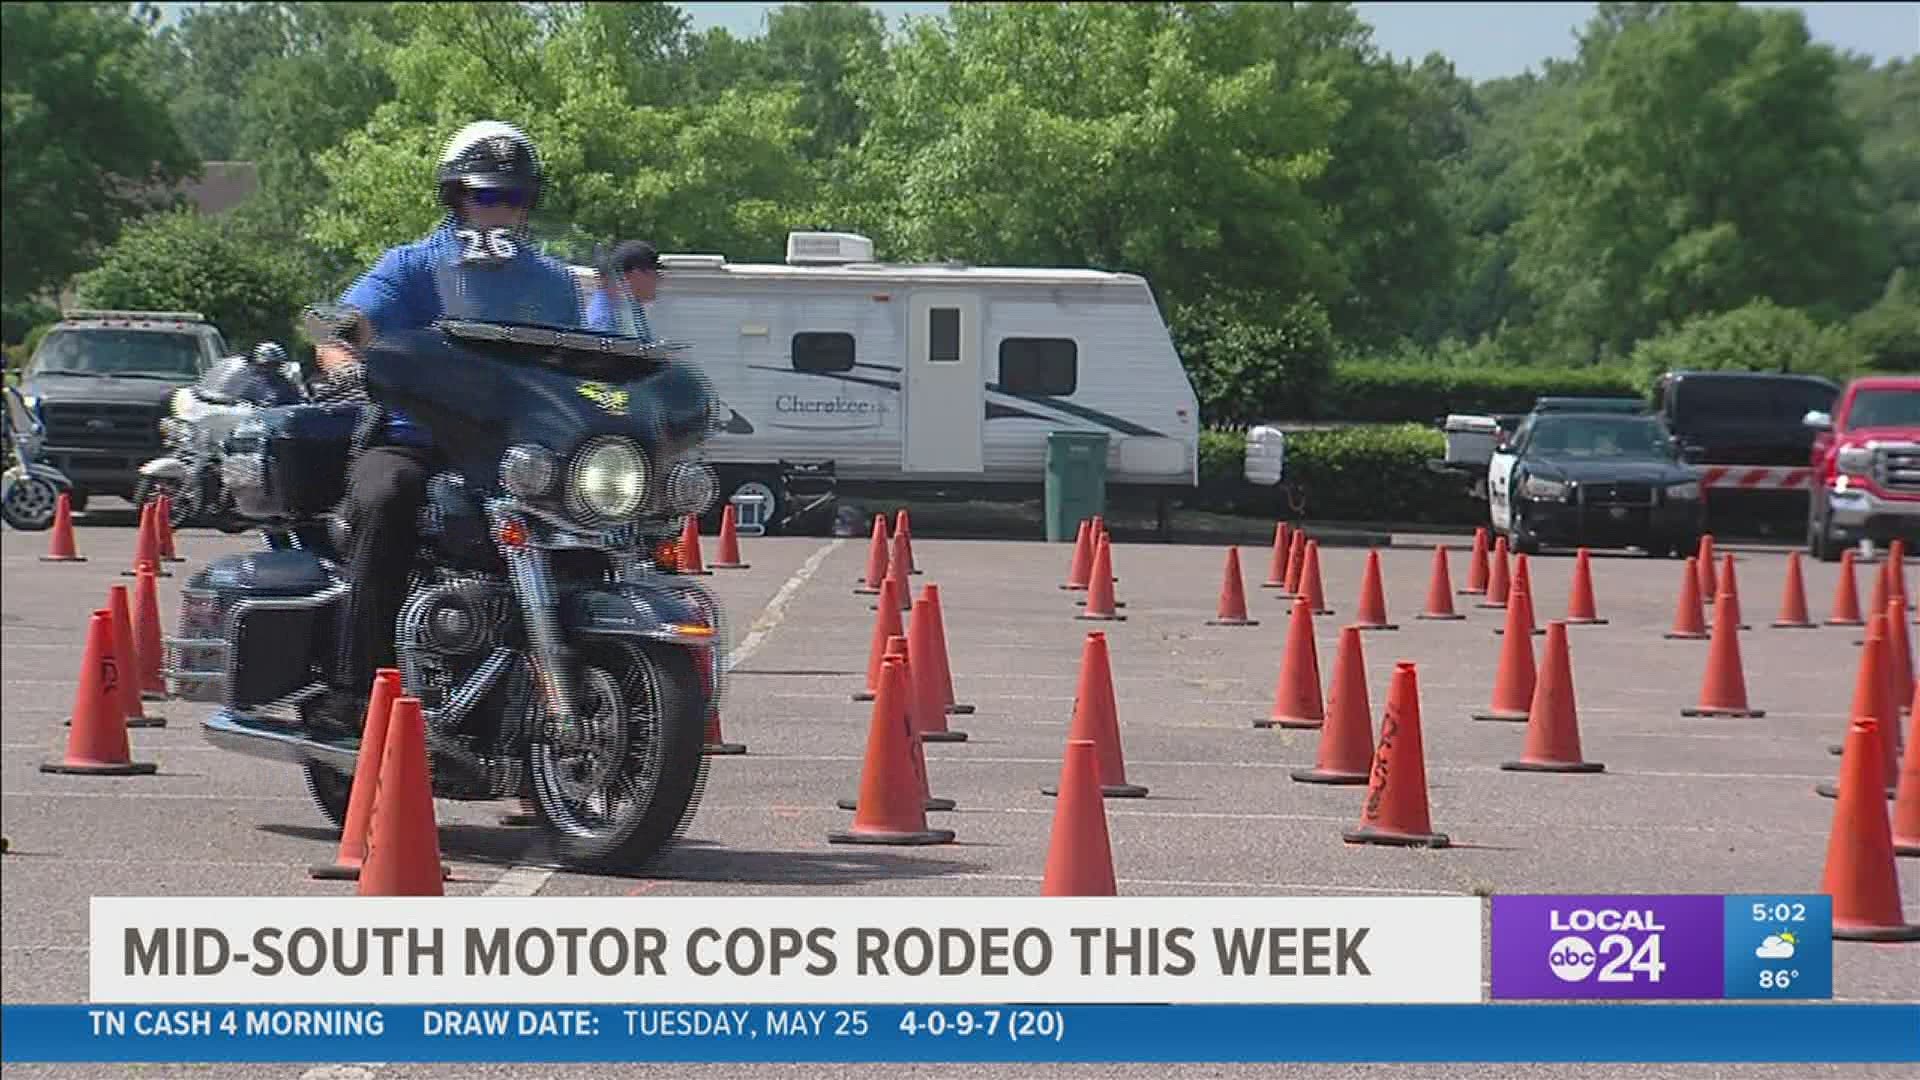 The Mid-South Motor Cops Rodeo is this week in Southaven.